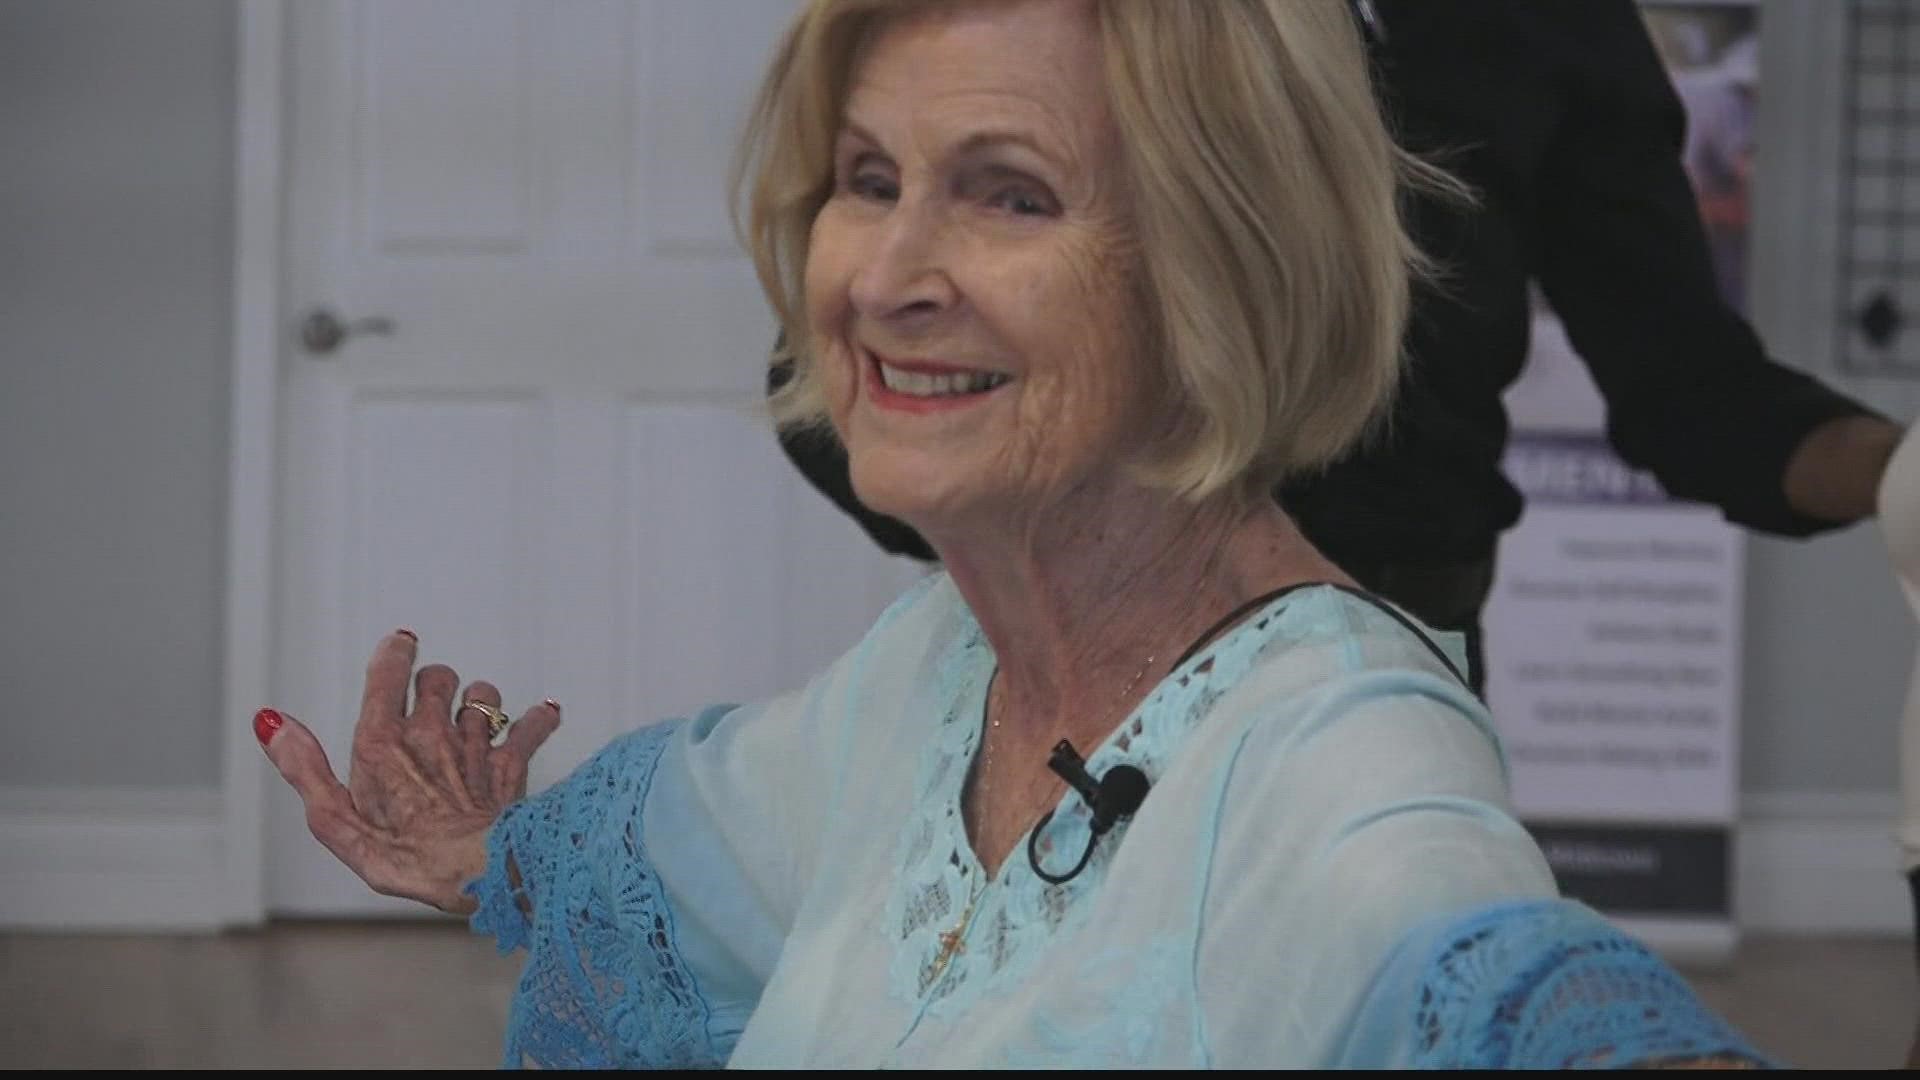 You're never too old to dance, and one metro Atlanta woman is proving it.